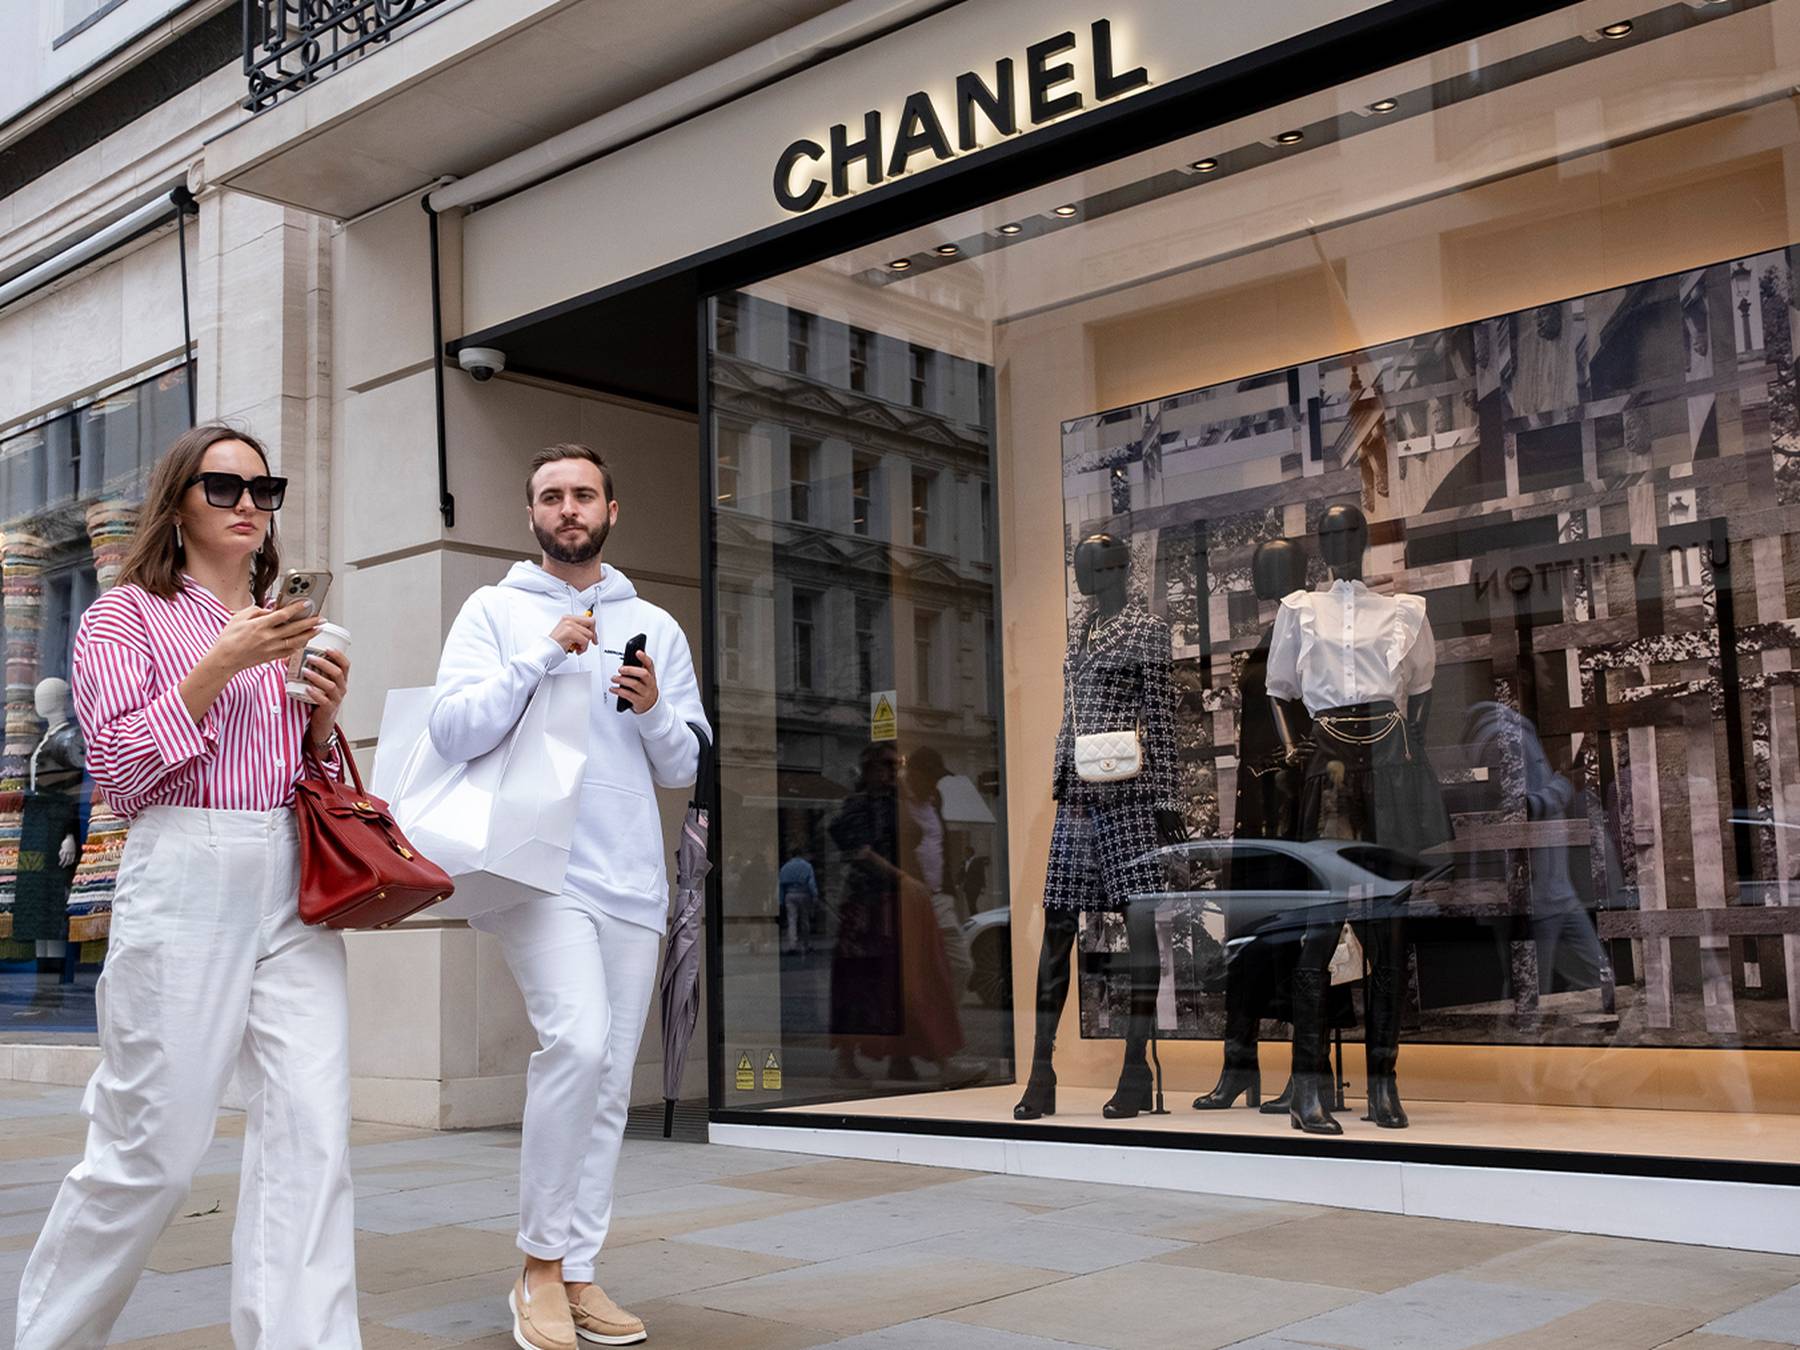 Chanel Increases Prices in China as Concerns About Luxury